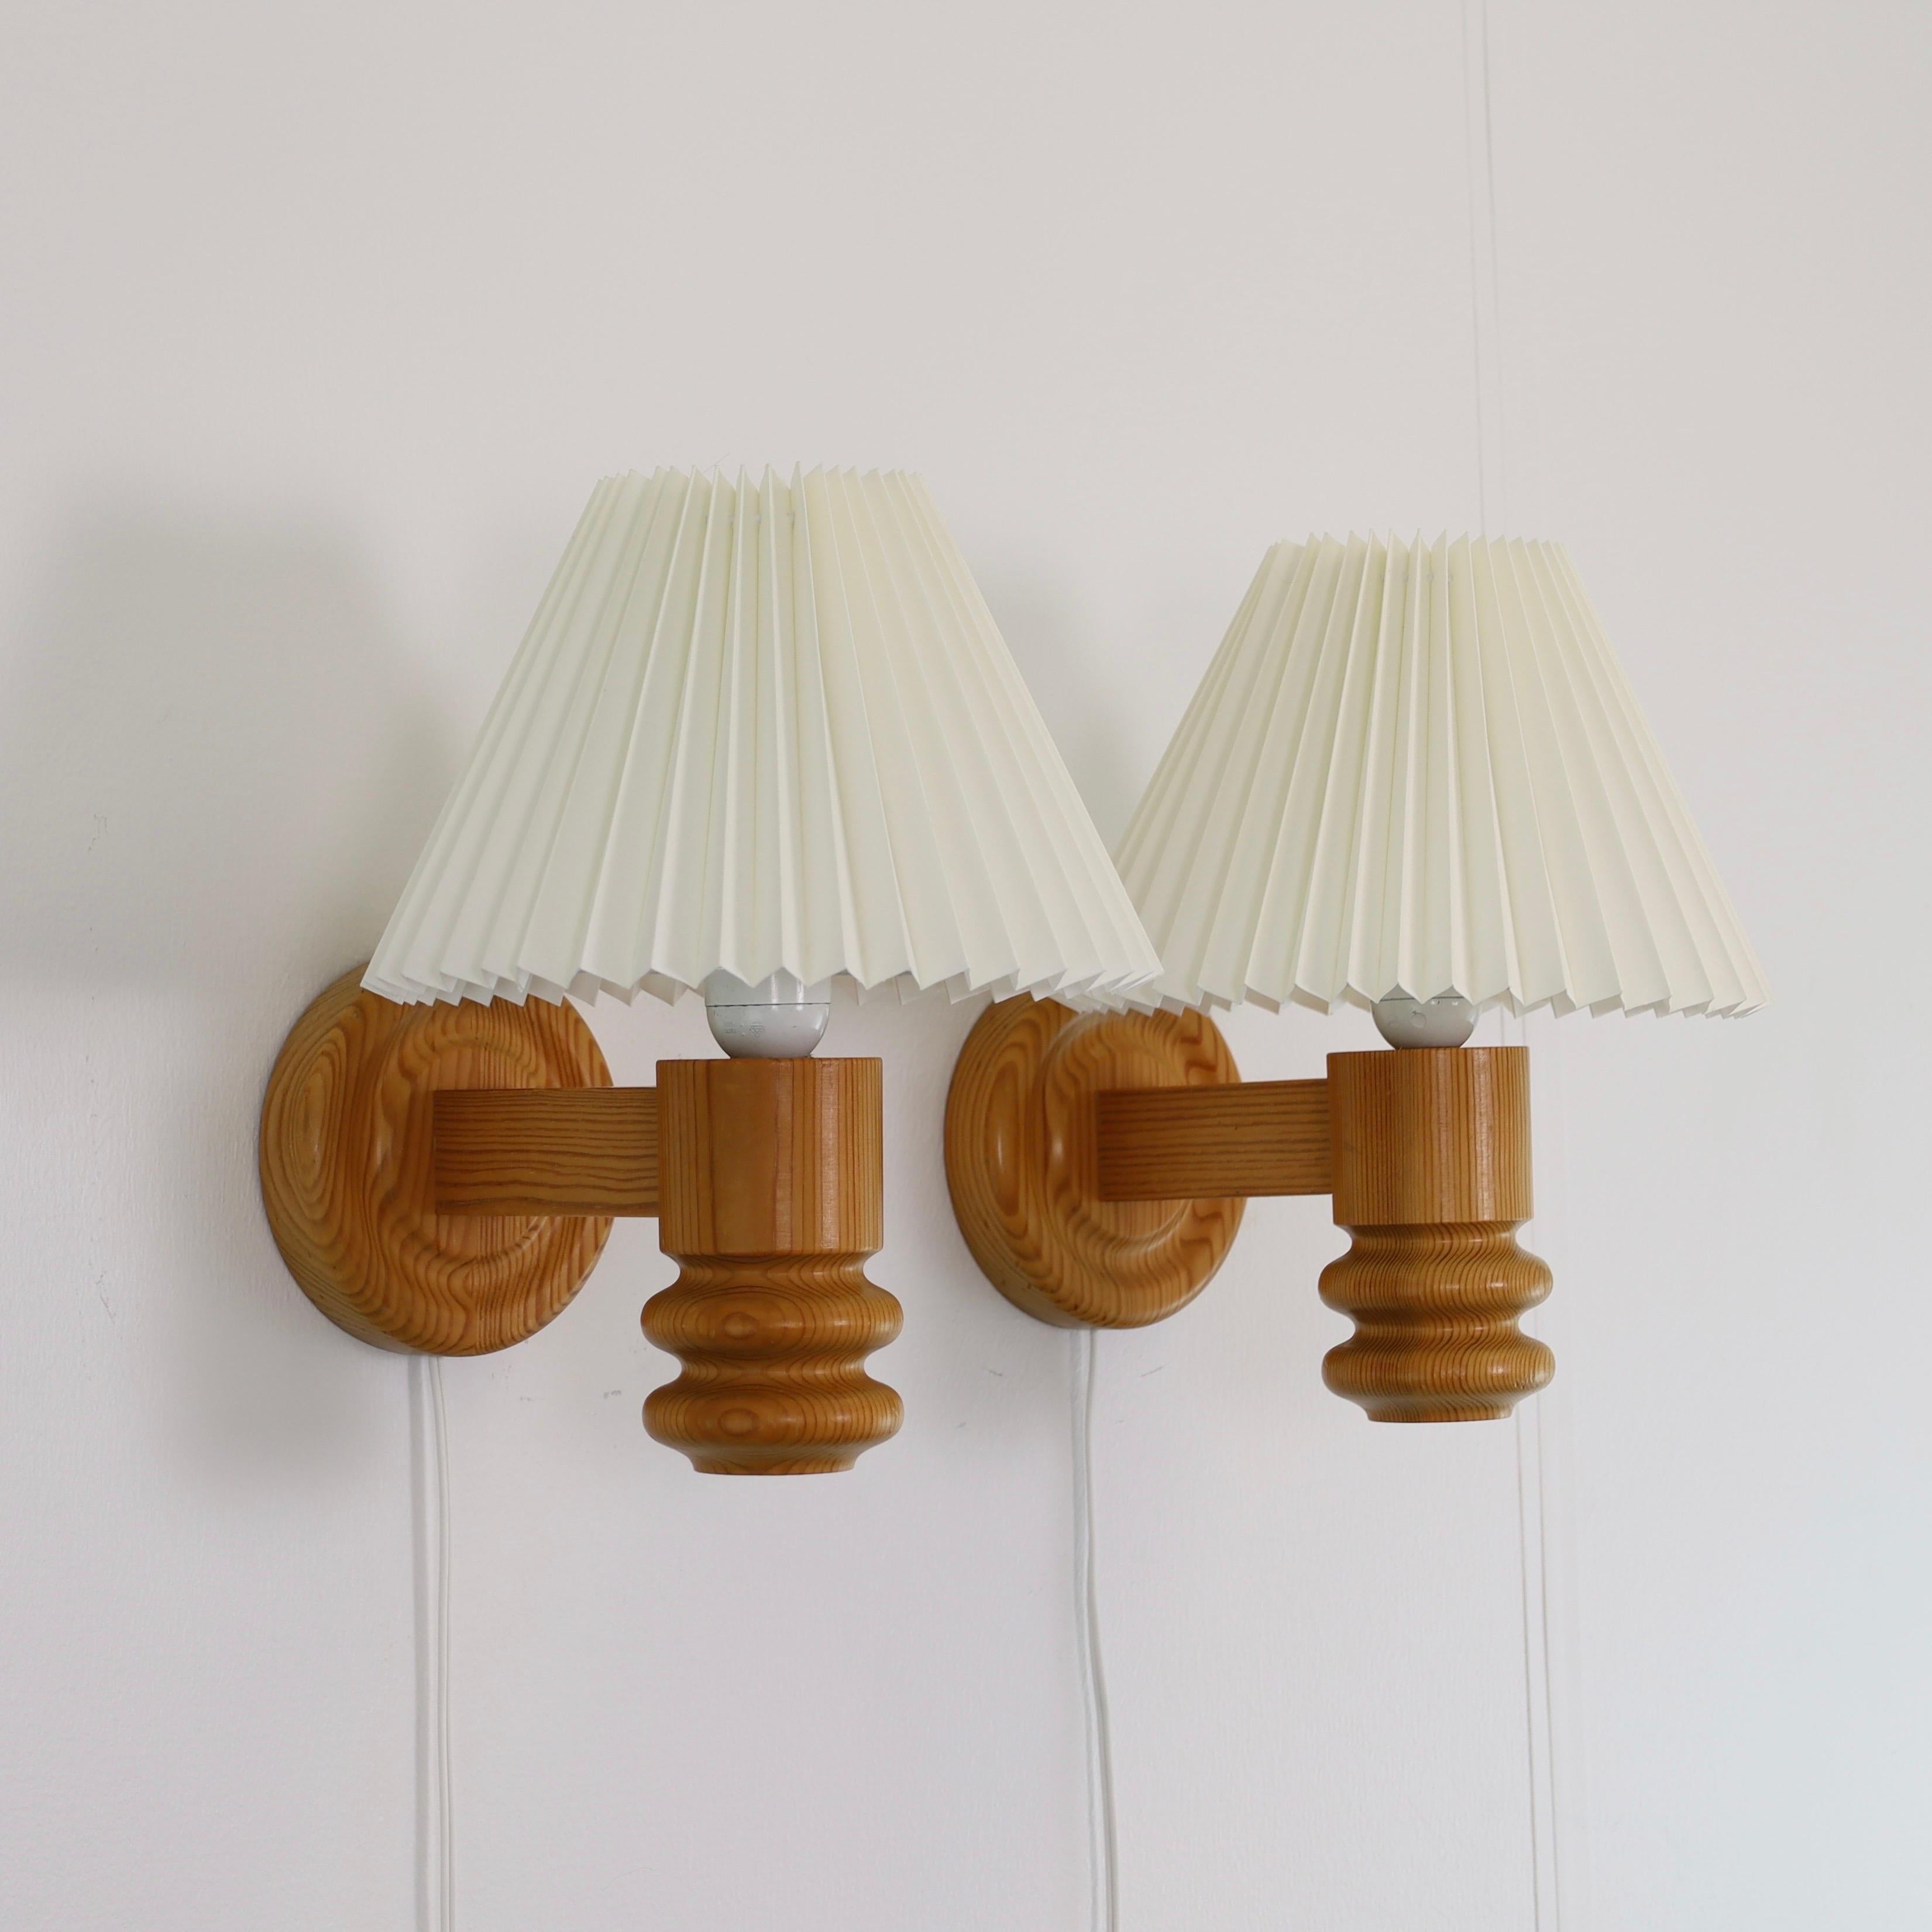 A set Swedish Modern Pine wood Wall lamps made by Solbackens Svarveri in the 1970s. A Scandinavian touch to a beautiful home.

* A pair (2) of wall lamps in Pine wood with white pleated fabric shades.
* Manufacturer: Solbackens Svarveri, Sweden
*